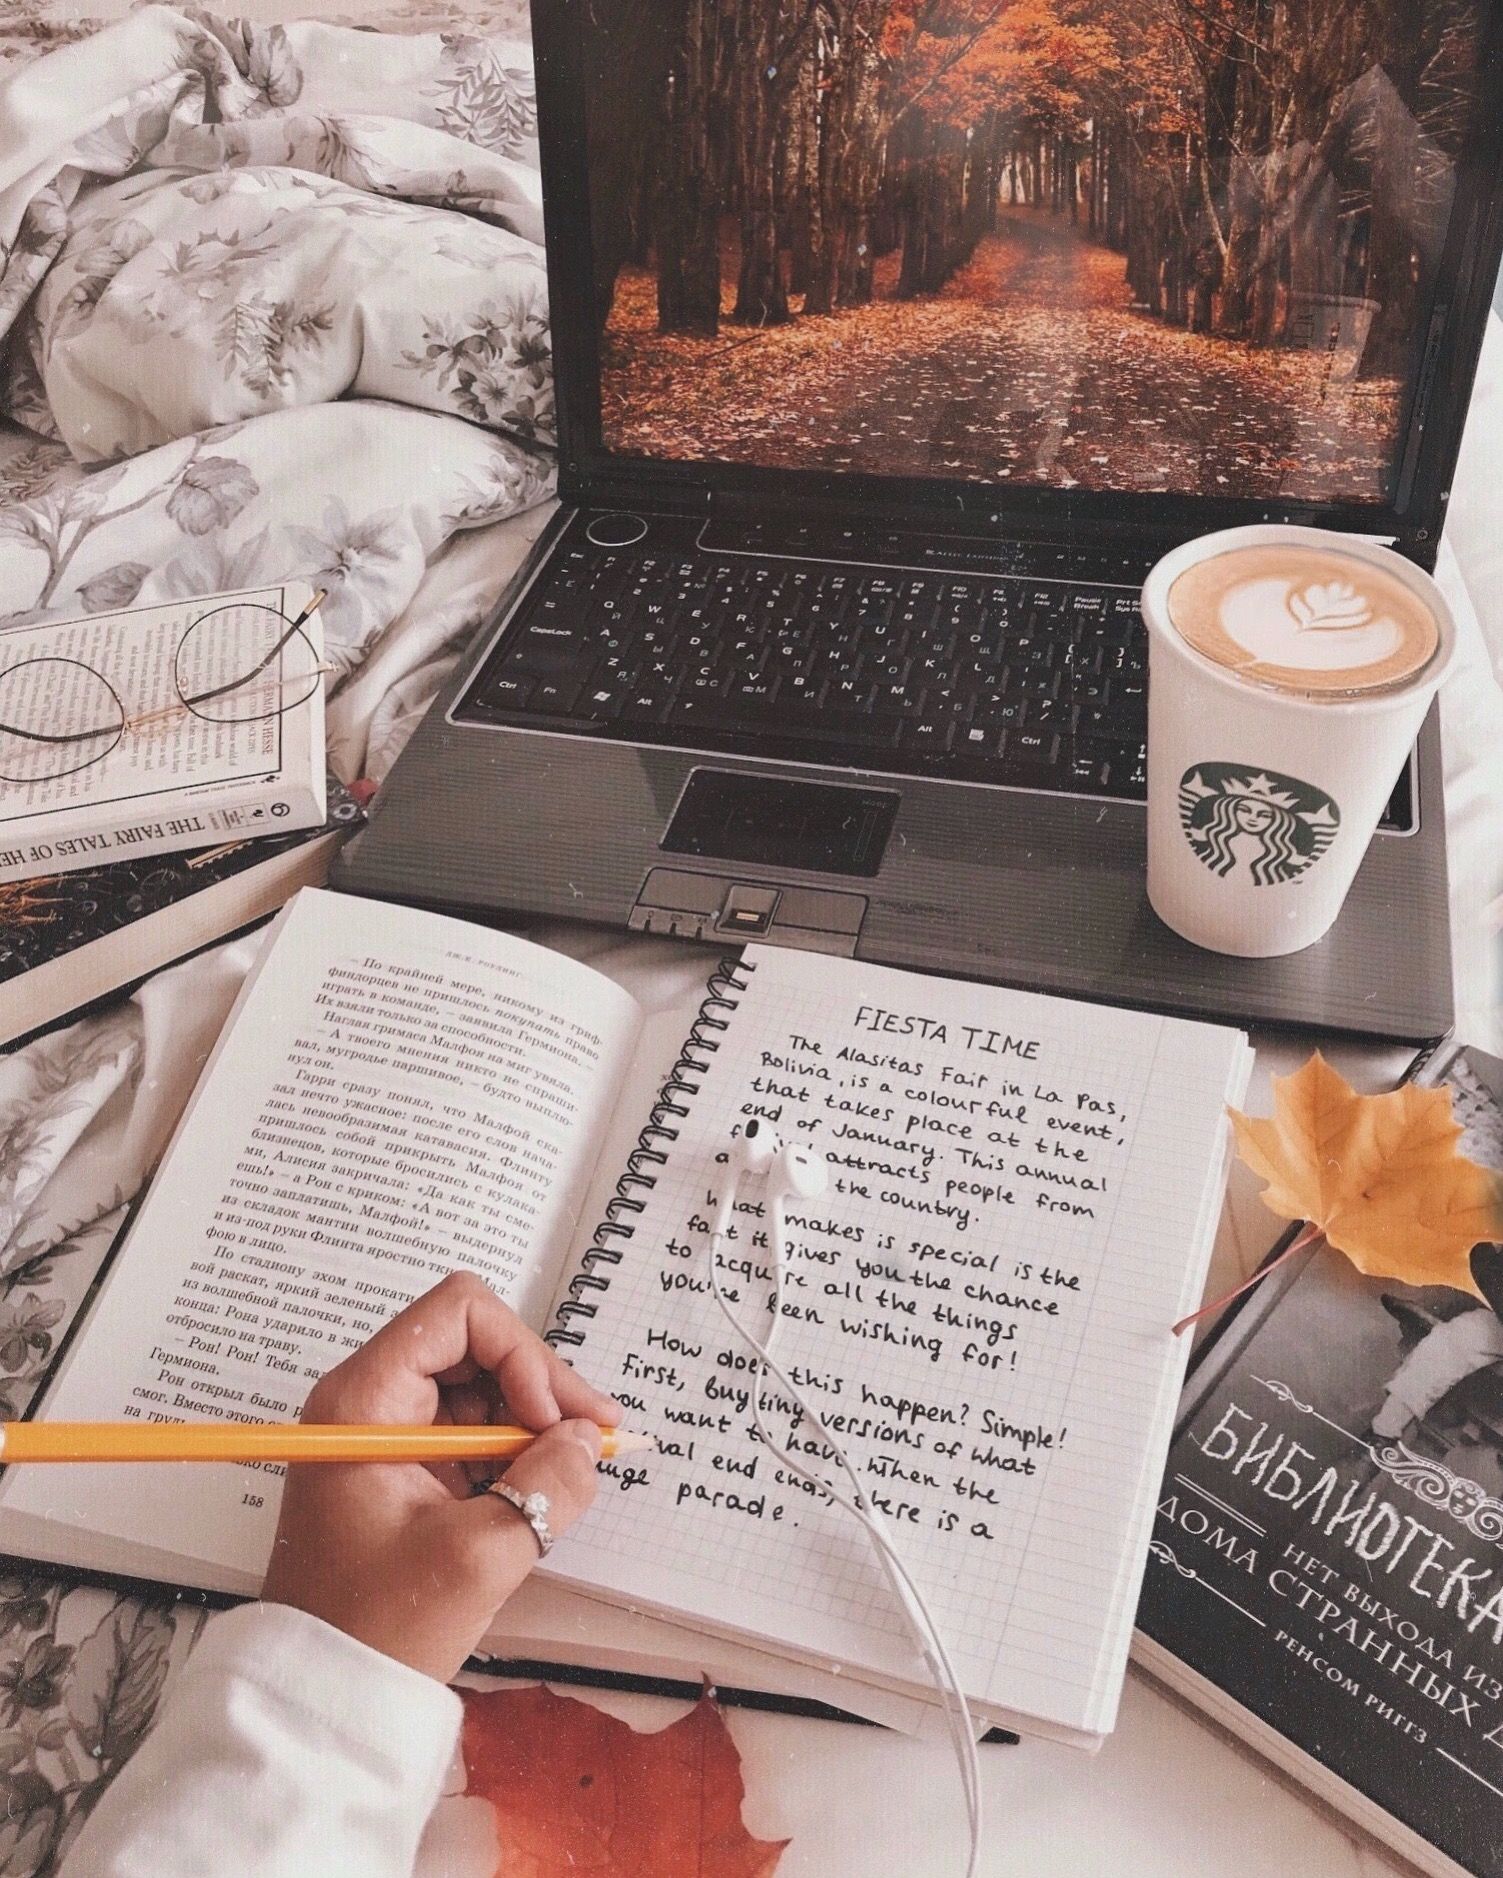 Aesthetic✨. Coffee and books, Study inspiration, Study